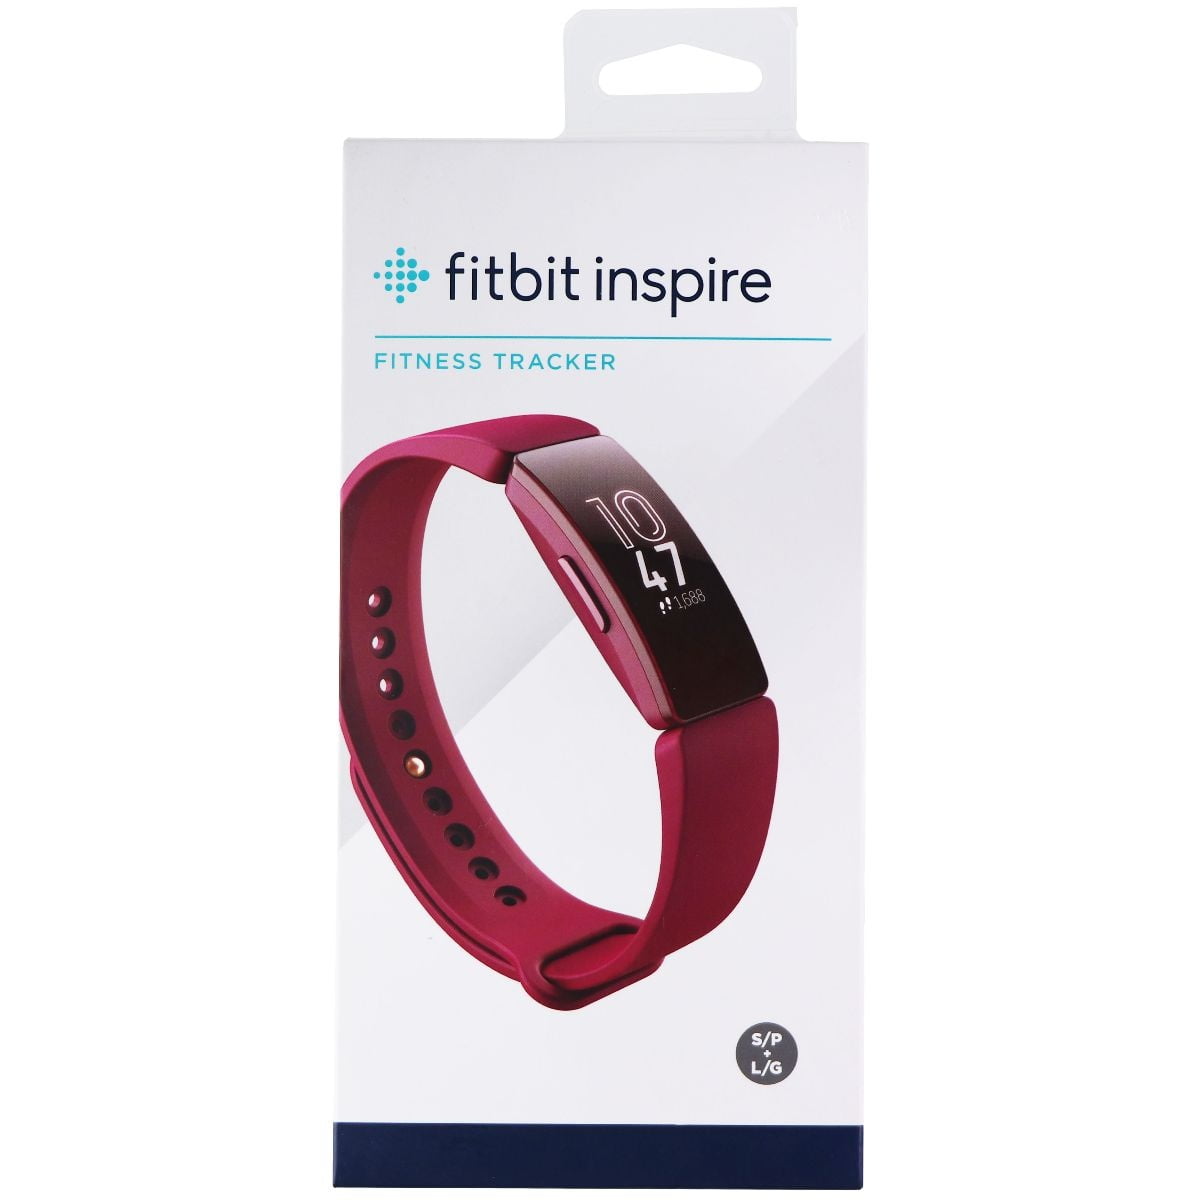 Fitbit Inspire Fitness Tracker, One and L Bands Included) | Walmart Canada